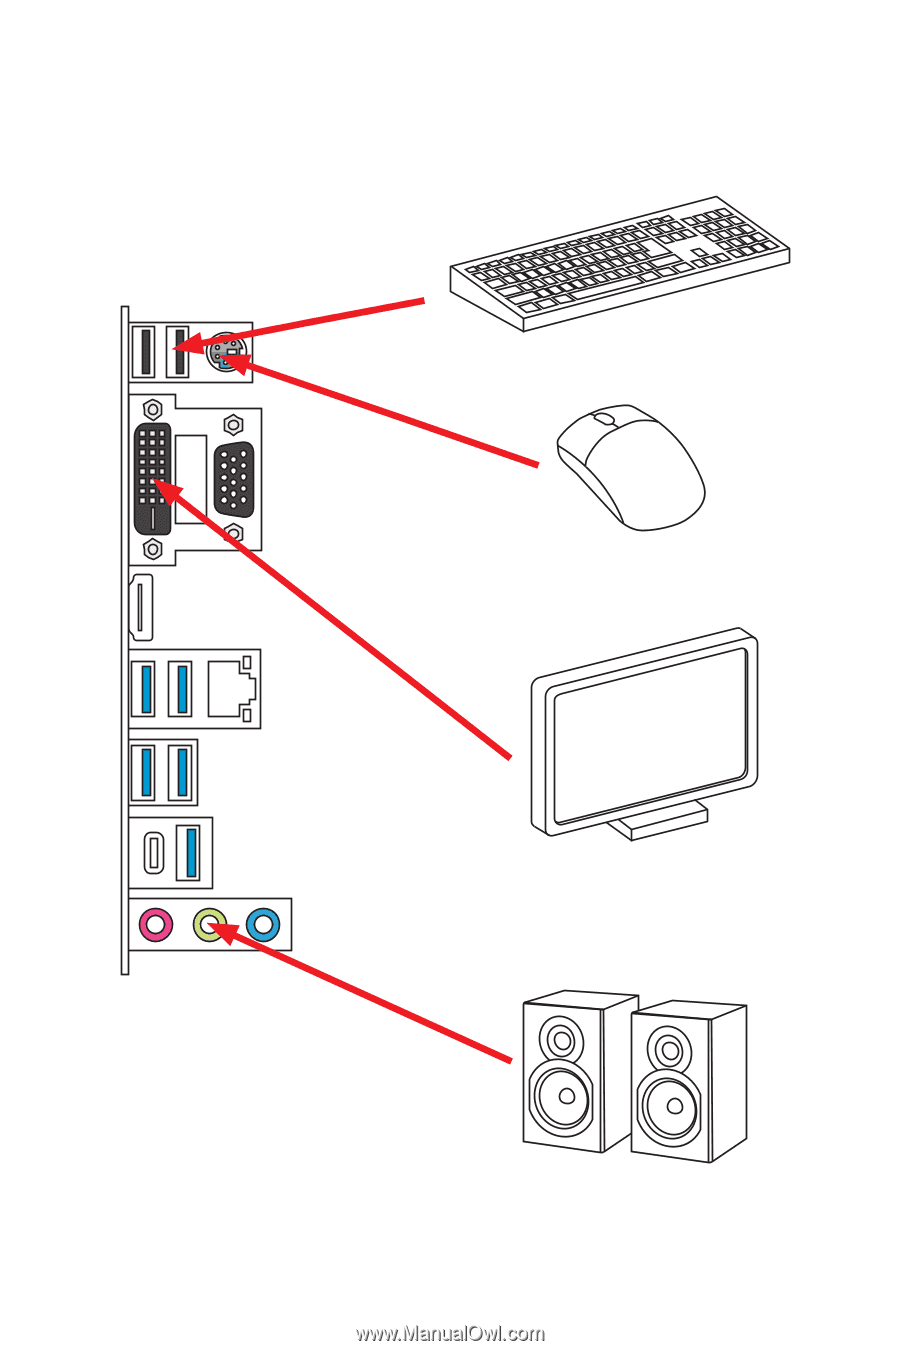 Connecting Peripheral Devices Msi Z270 Pc Mate User Manual Page 10